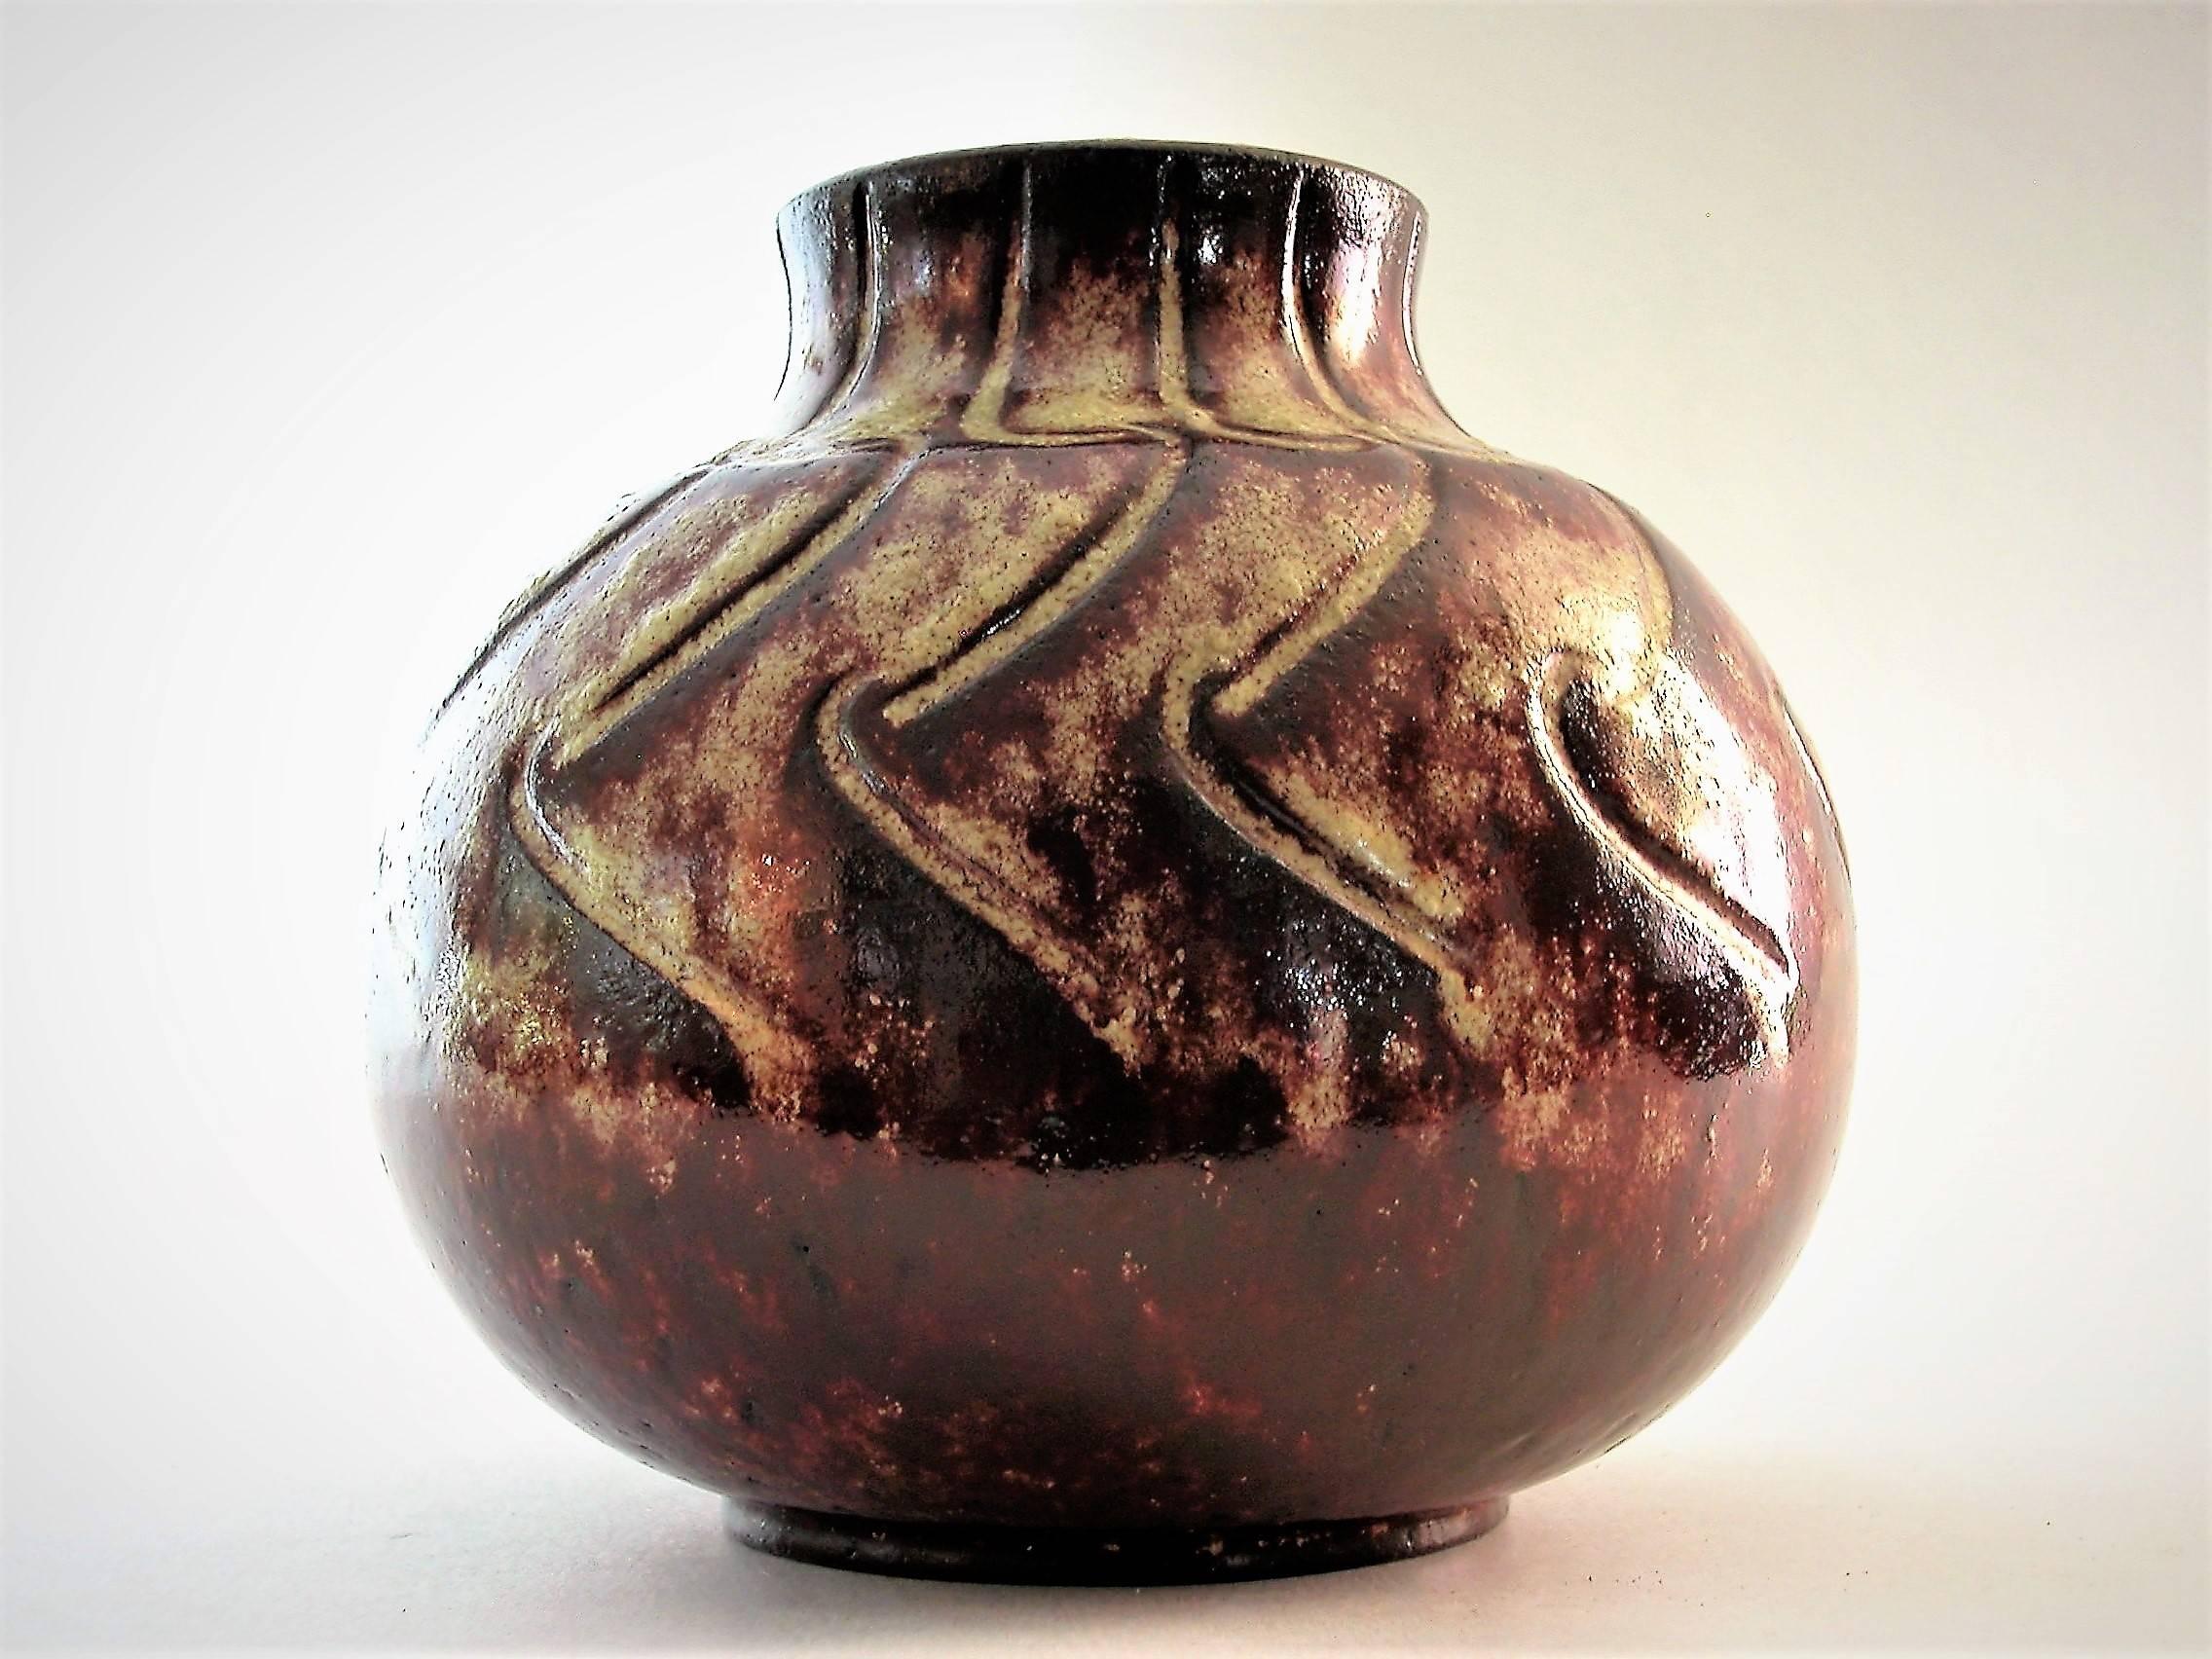 Mid-20th Century Rare Monogram RG Ceramic Vase, Raphaël Giarusso or Giarosso, for Accolay, Signed For Sale